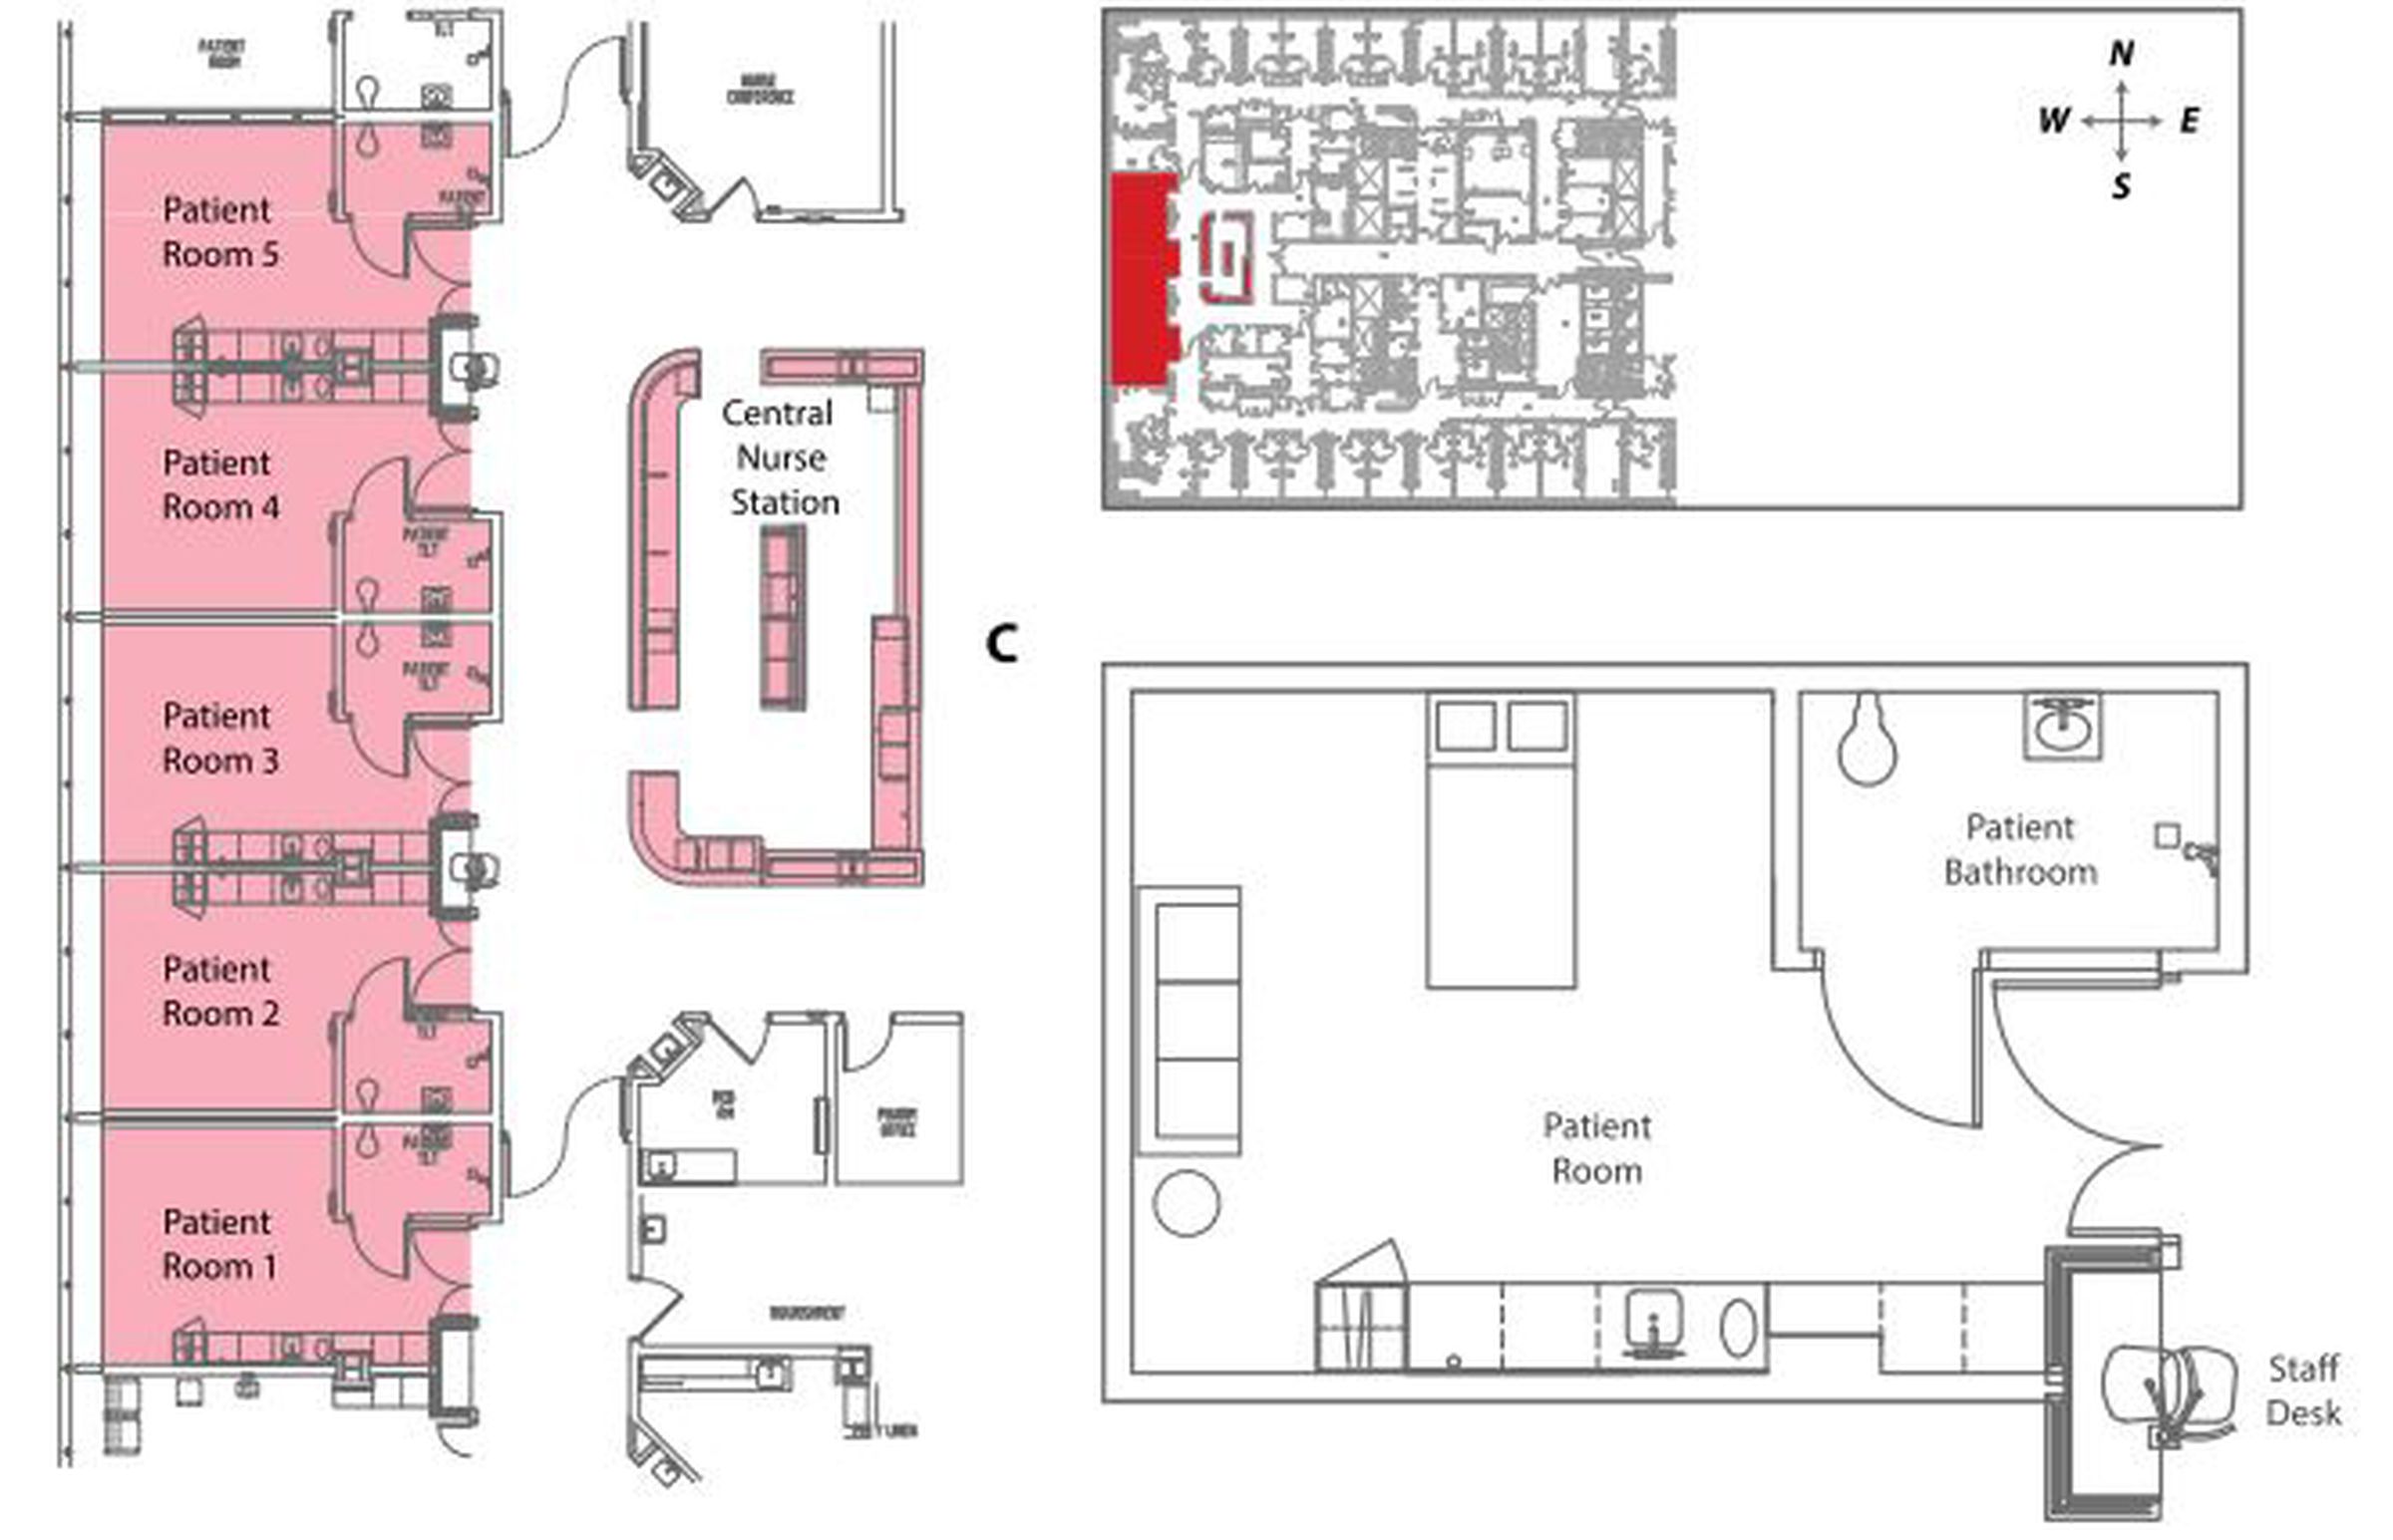 Floor-plan of the newly opened hospital analyzed in the study.